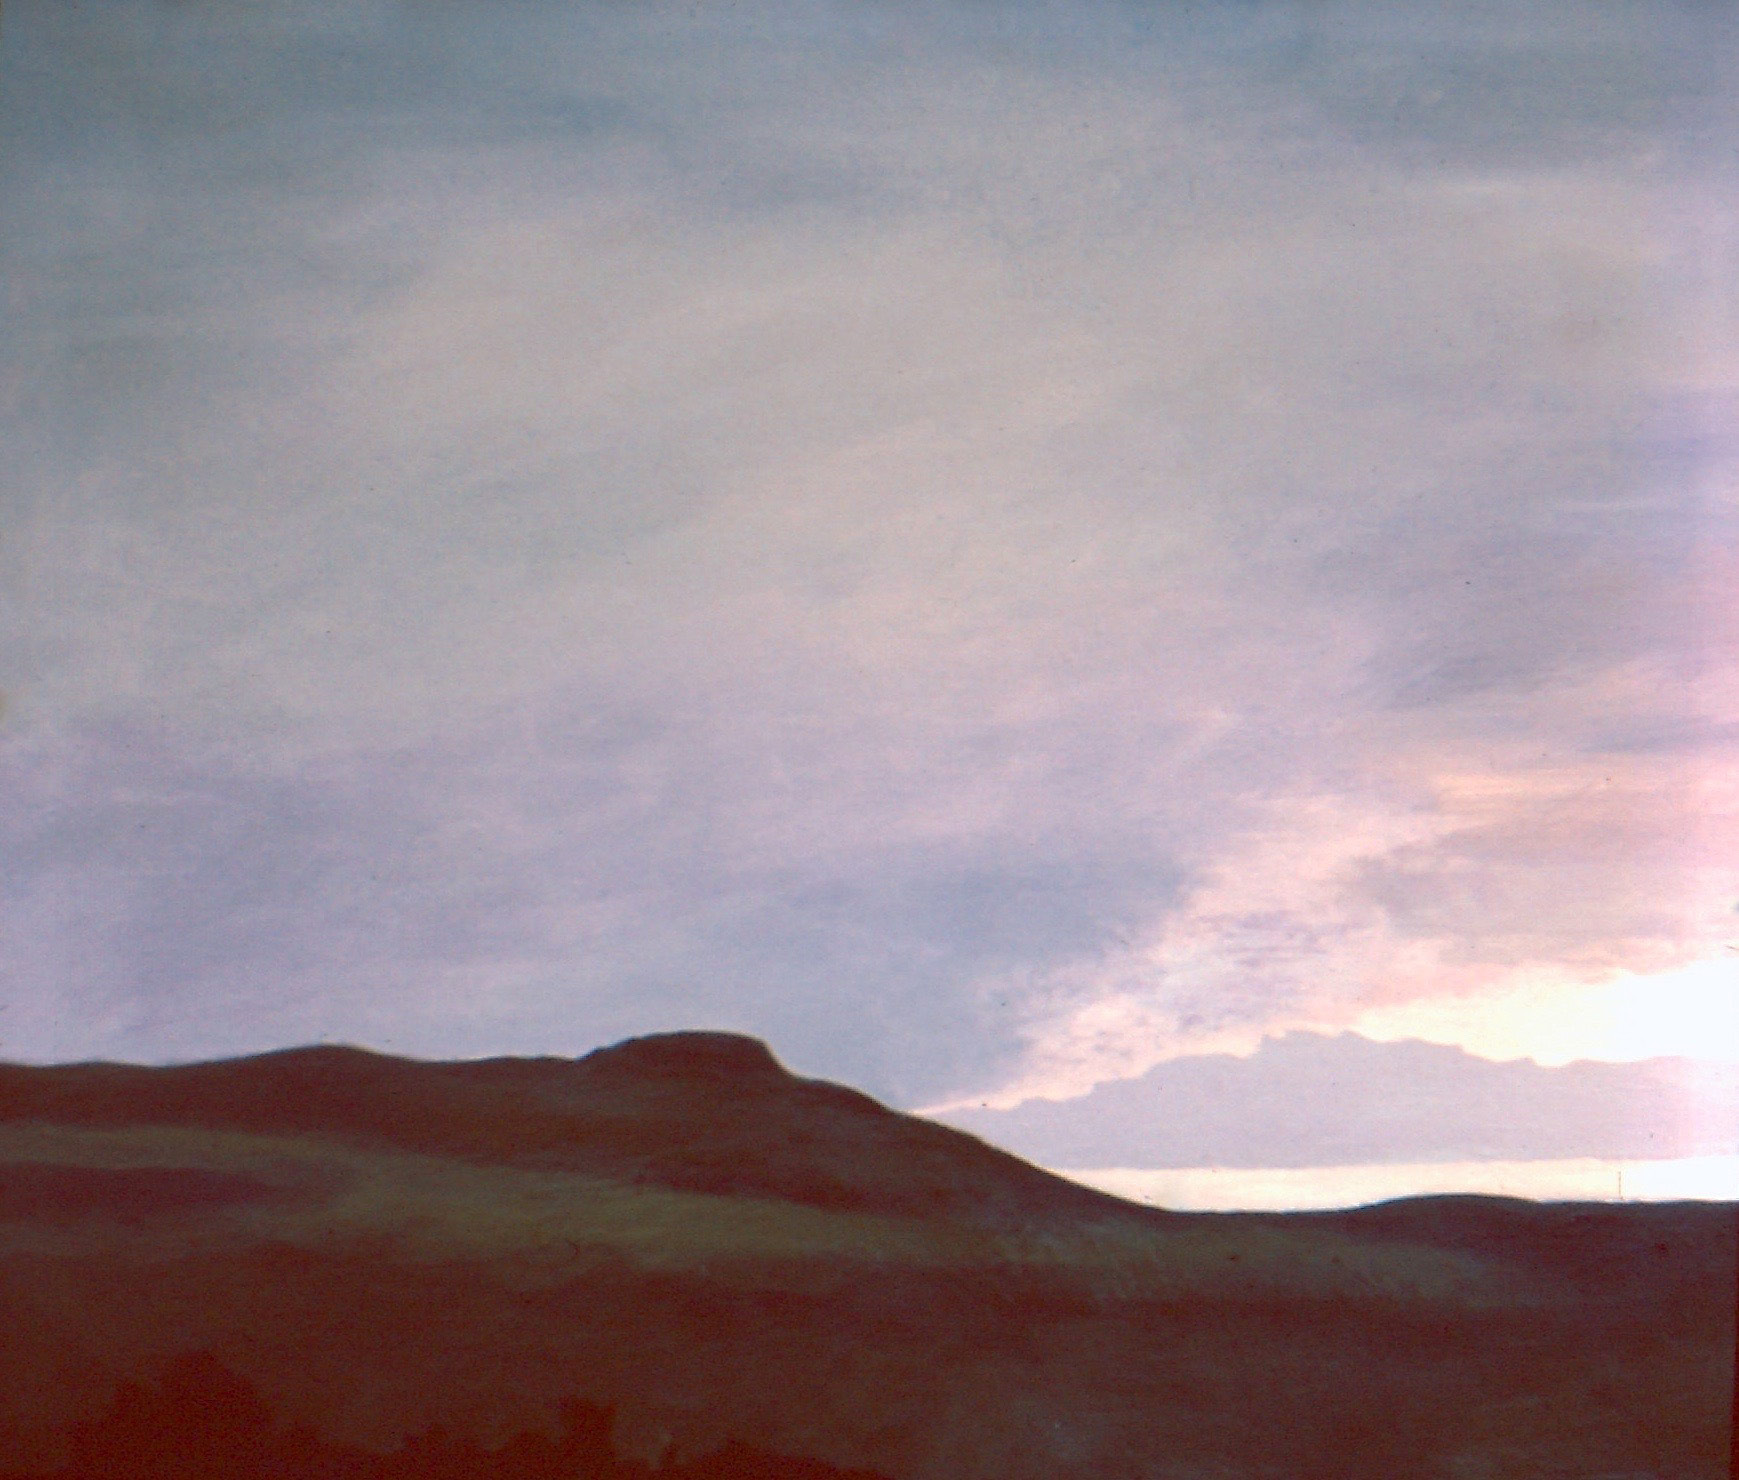 “Storm in the Flint Hills,” Acrylic on canvas, 24 x 30 inches, by Jane Pronko, 1975